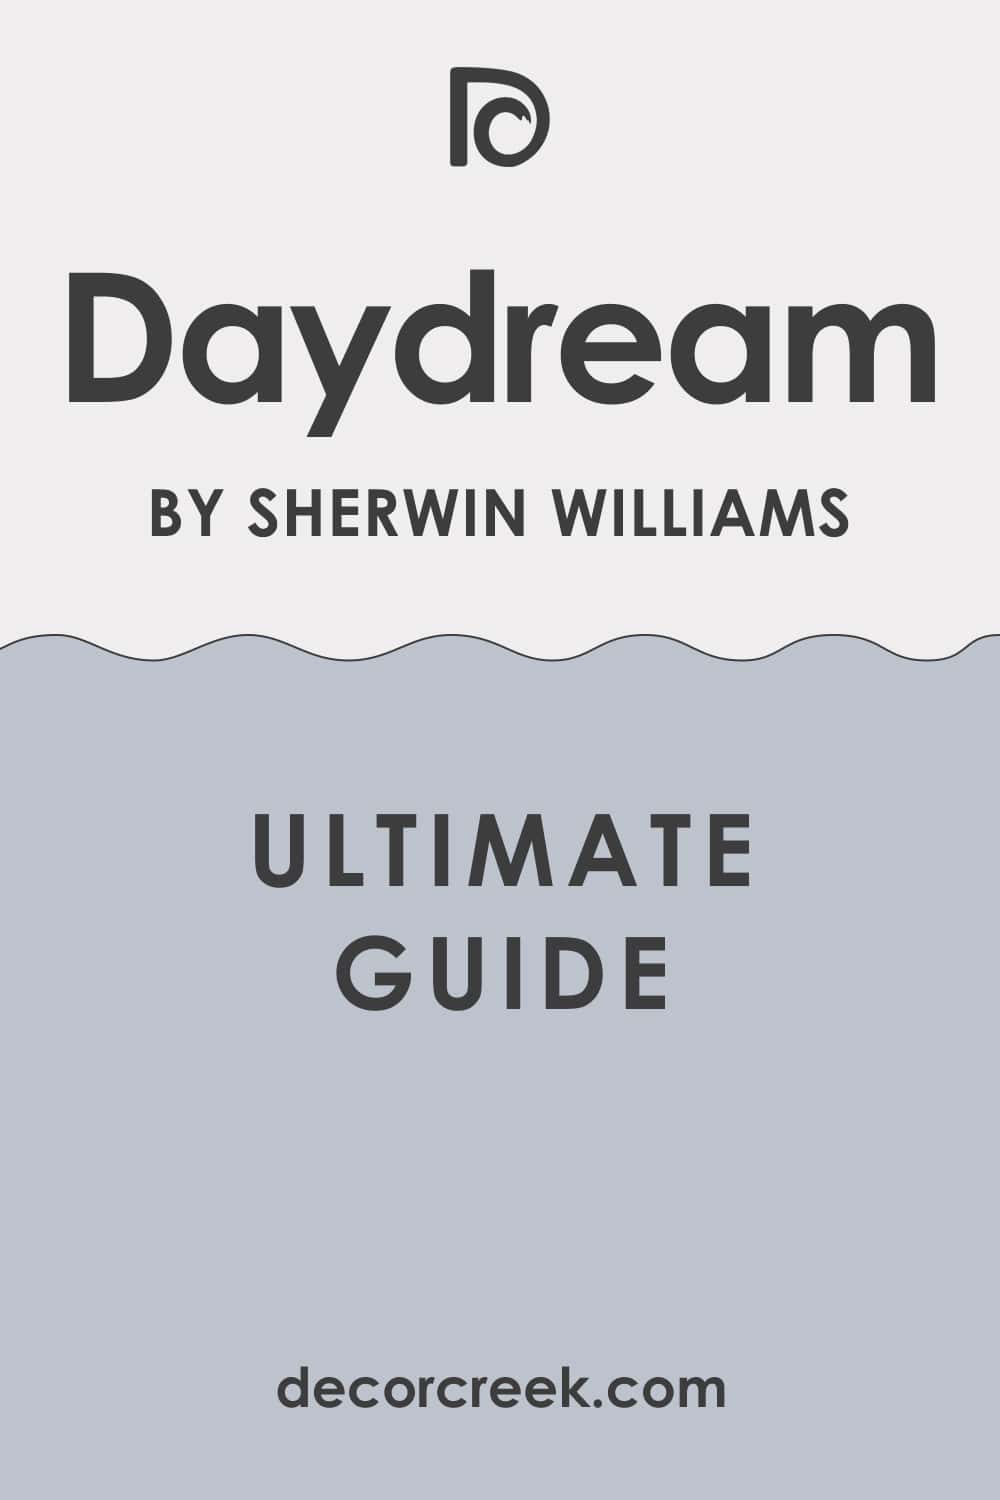 Ultimate Guide of Daydream SW-6541 